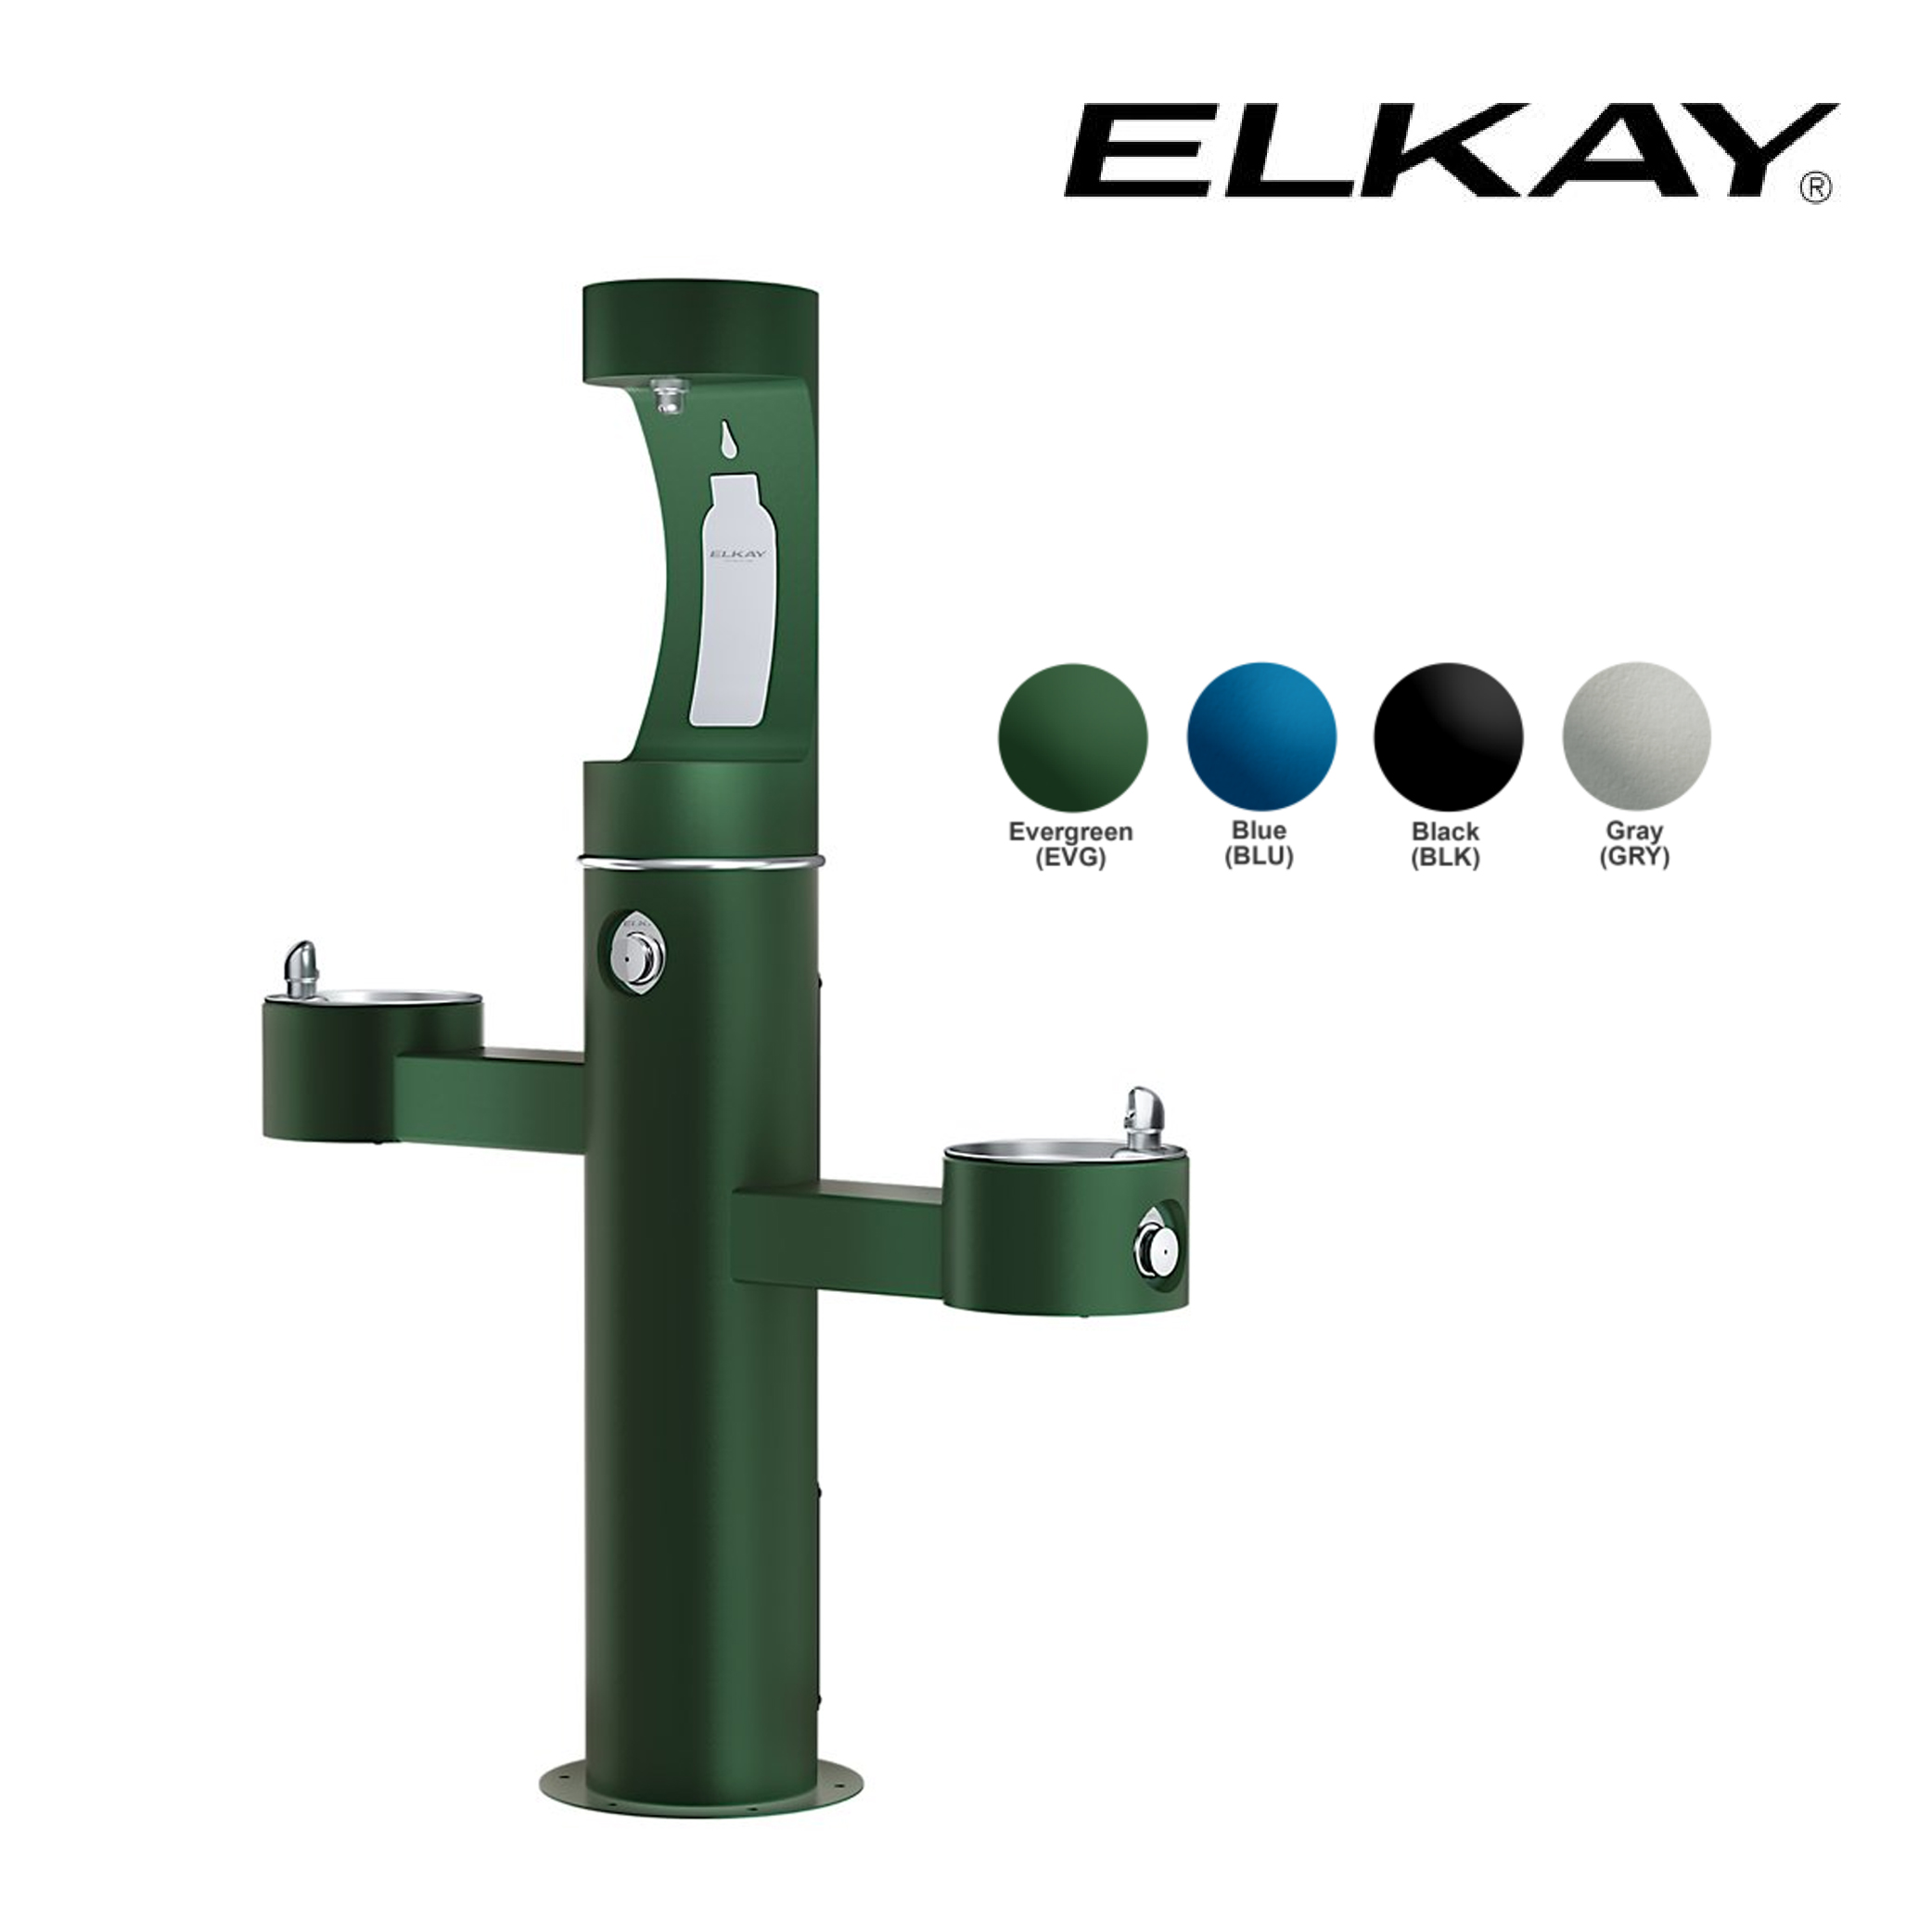 Epakai Online Store for Bathroom and Kitchen Accessories Products